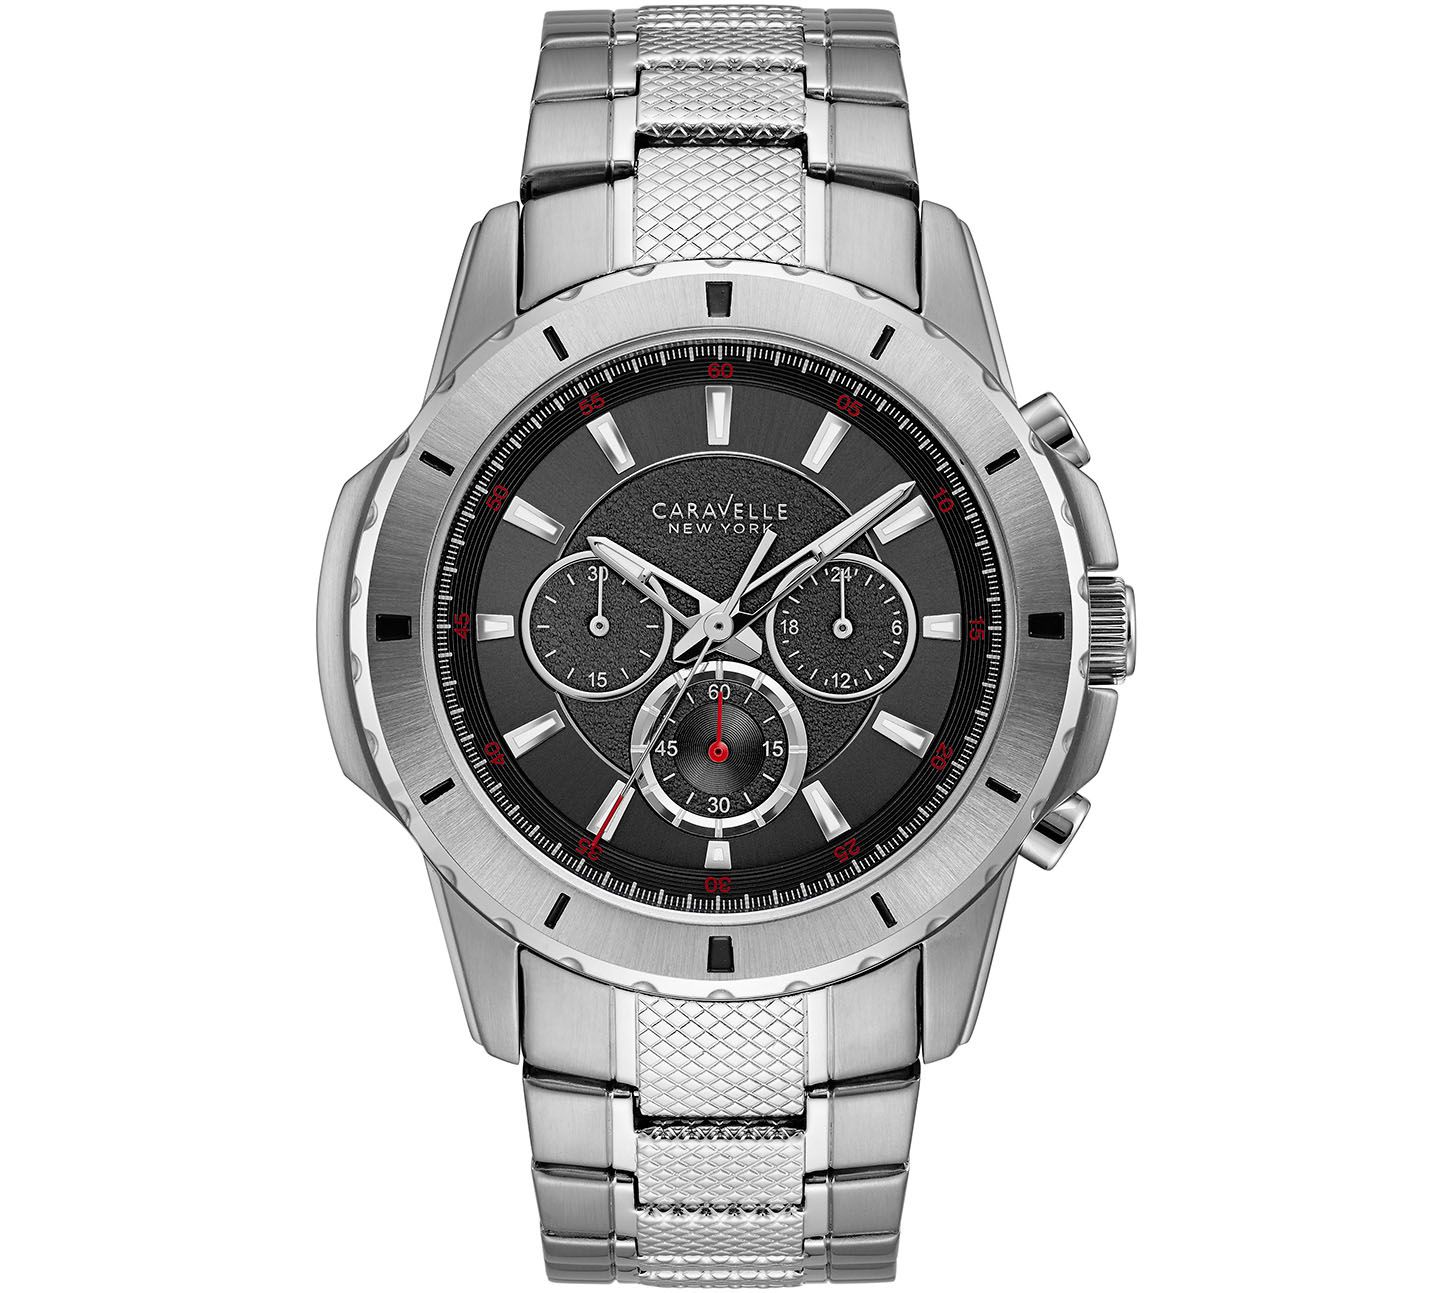 Caravelle by Bulova Men's Stainless Chronograph Watch - QVC.com